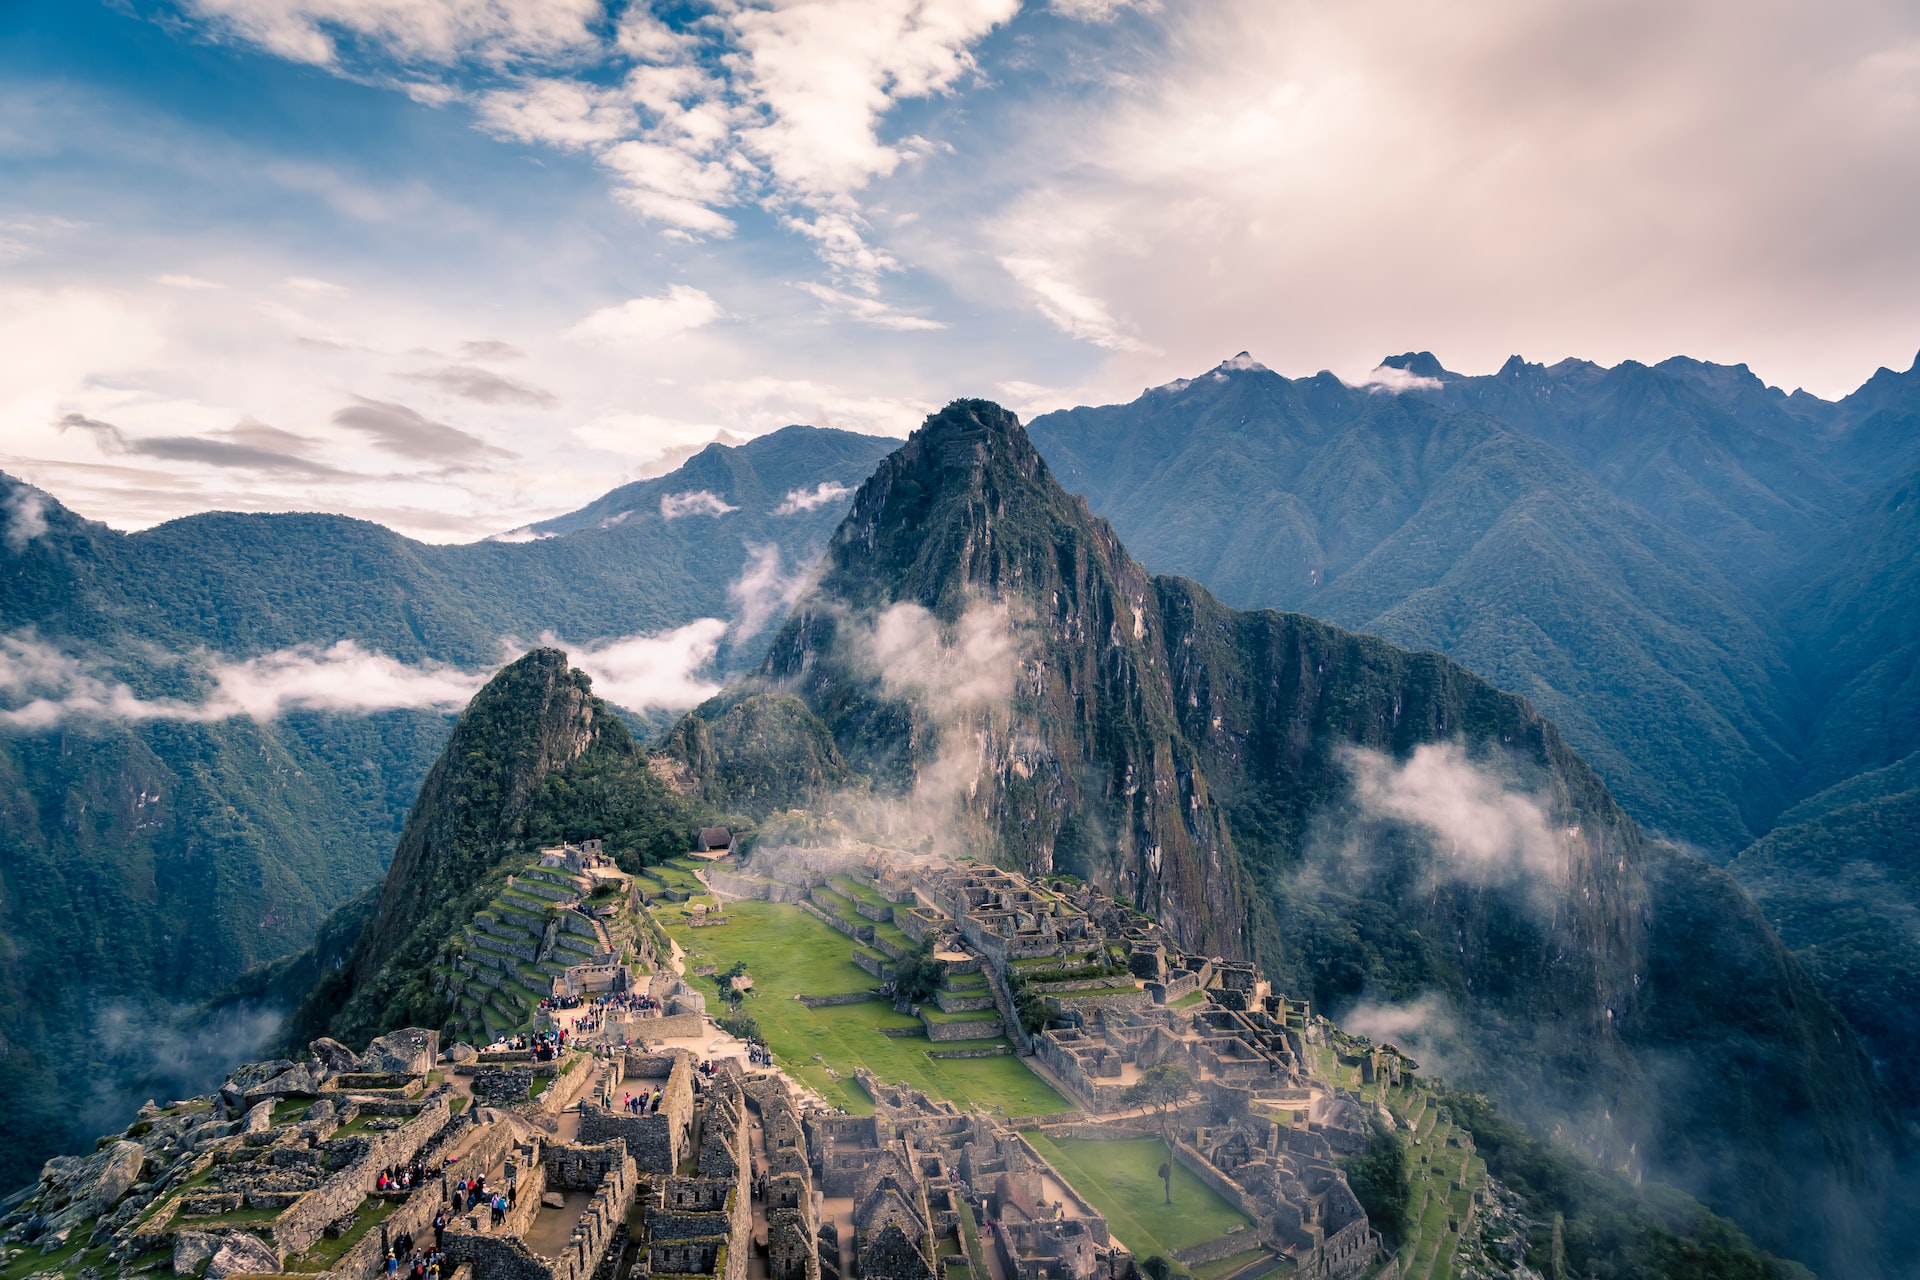 Machu Picchu and its Sacred Valley is the best places to visit in South America